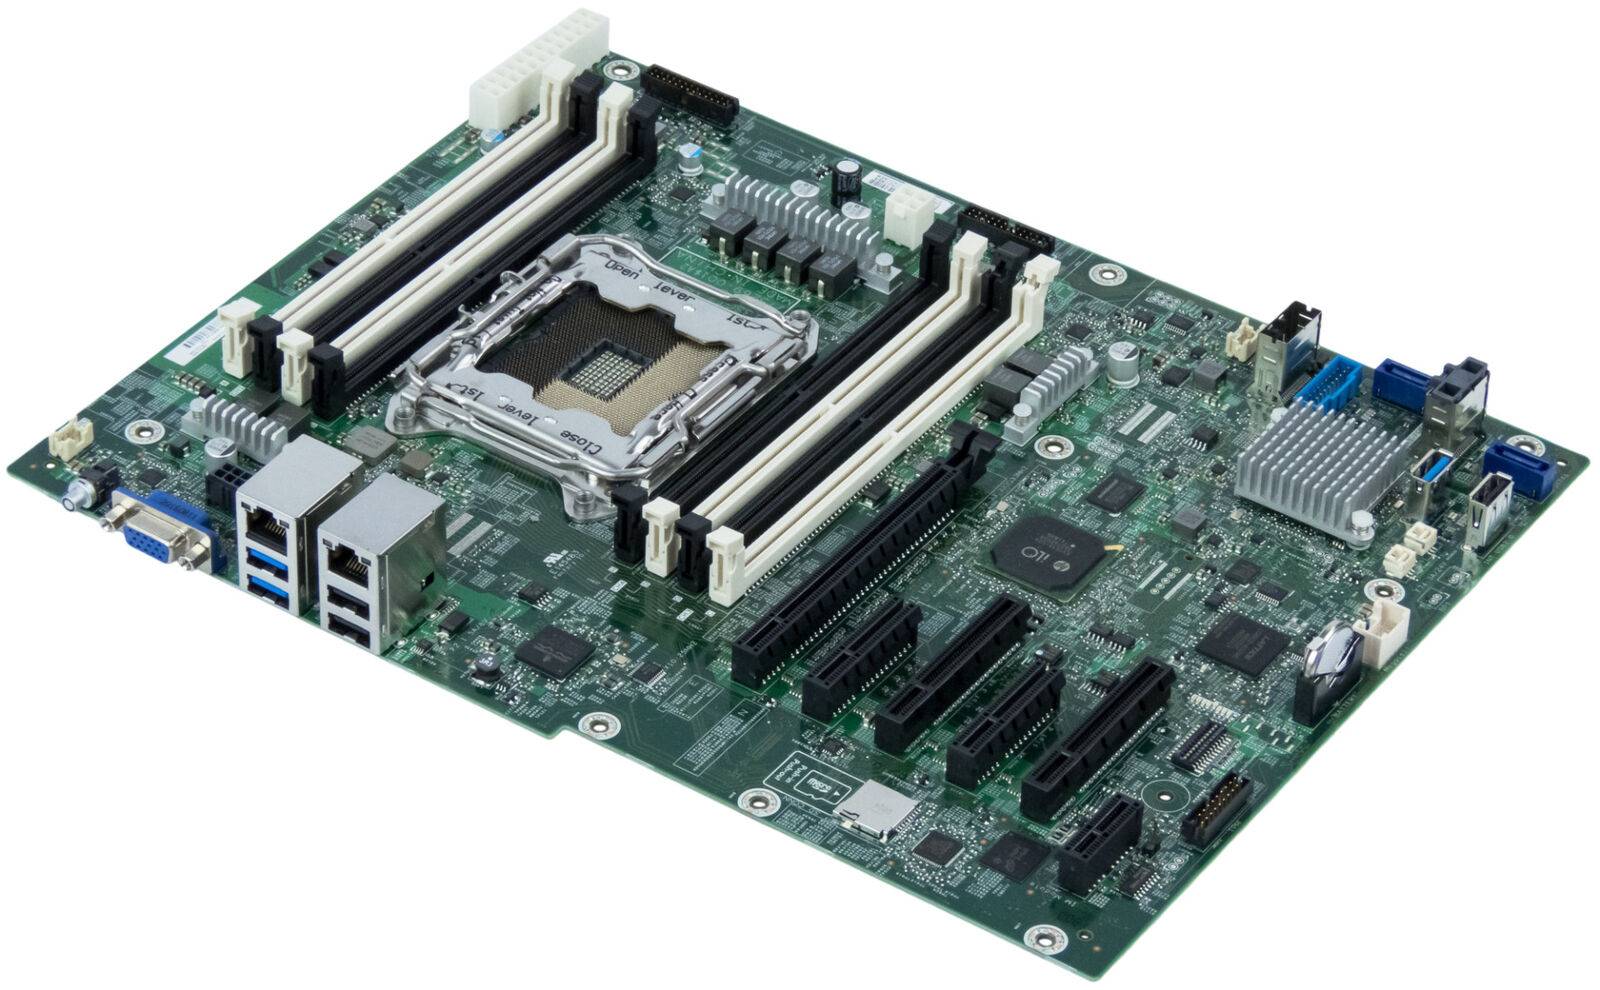 motherboard-para-hp-ml110-g9-791704-001-a13sgt2-idkmanager1.jpg